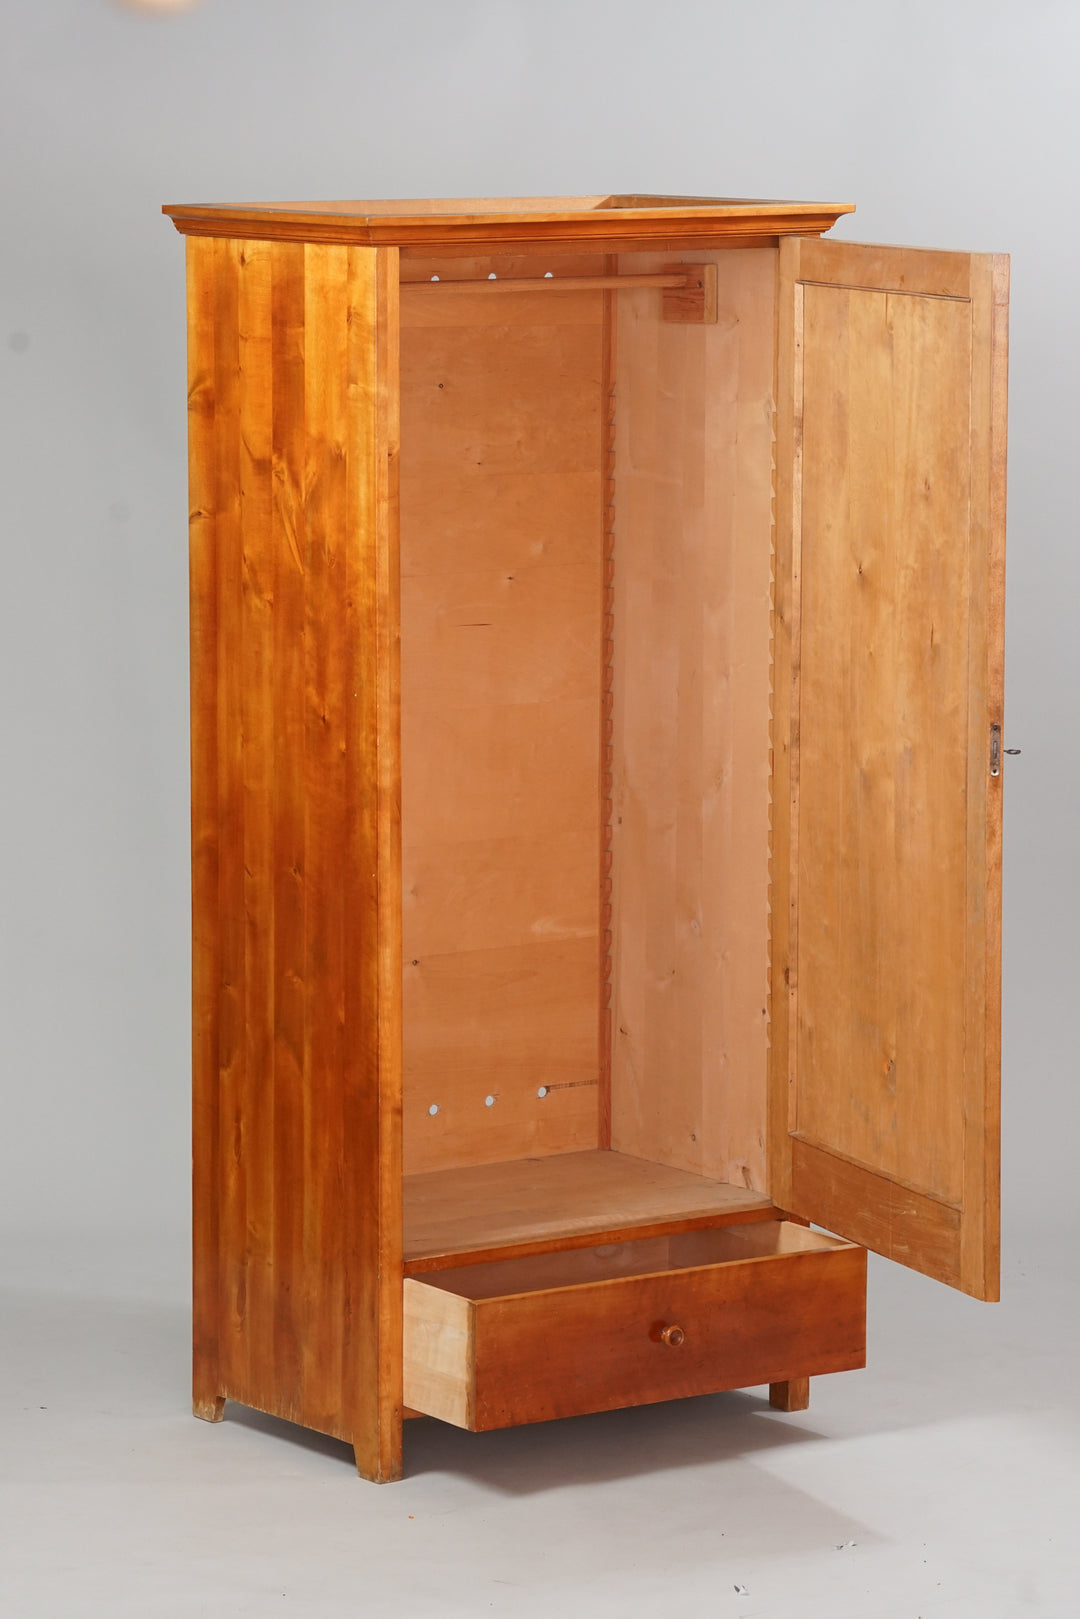 Whole birch cabinet with a door and one drawer at the bottom. Inside the cabinet is a rod for hanging clothes off of. 